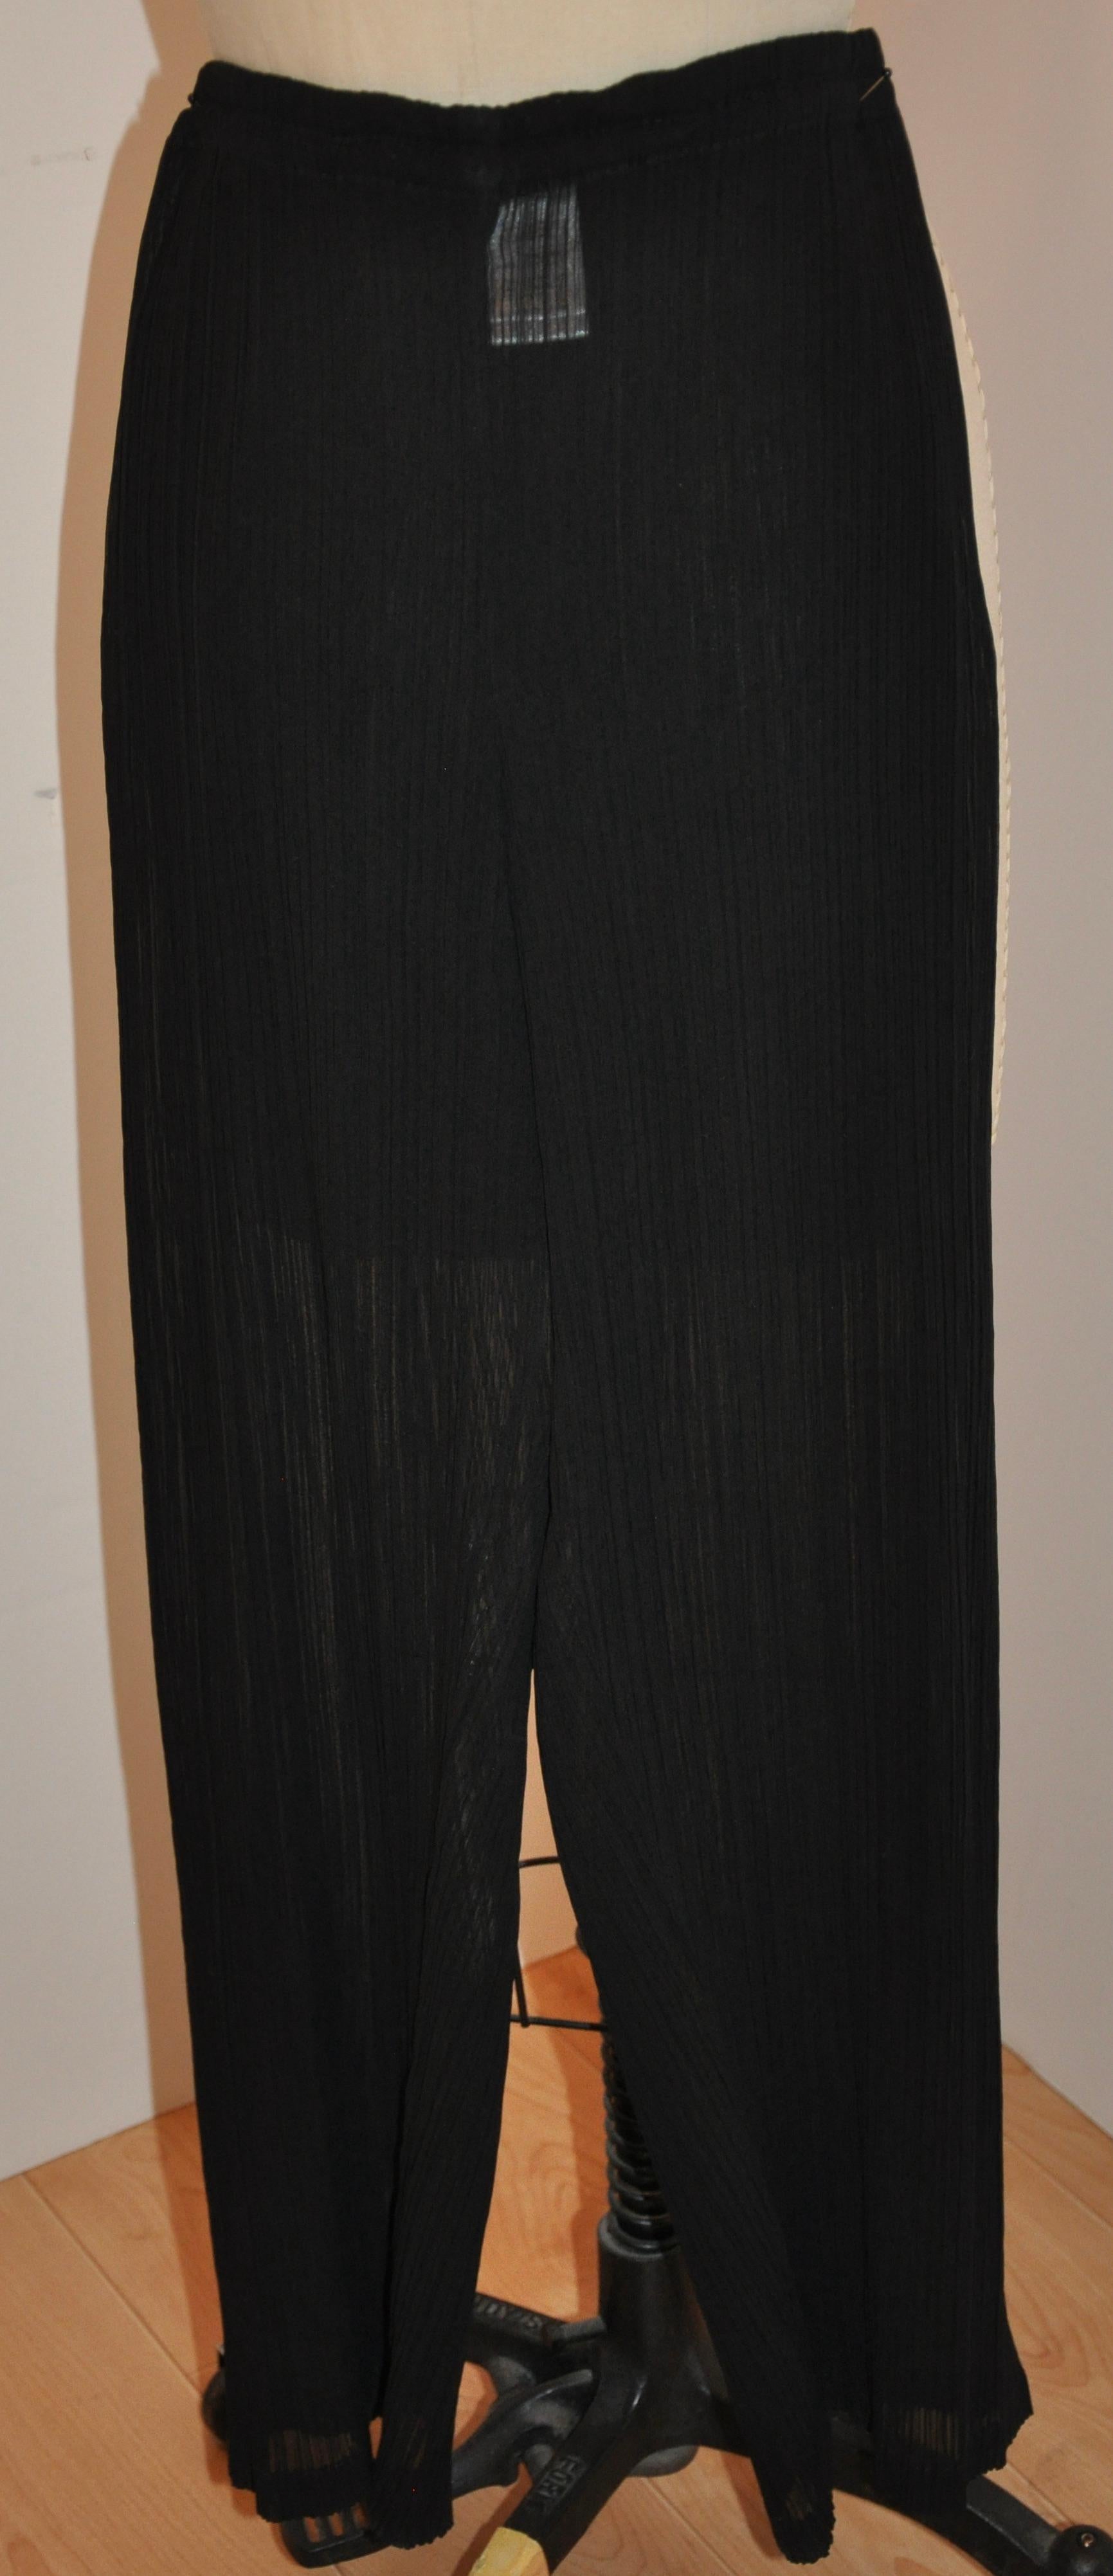        Issey Miyake signature jet-black elastic-waist wide-leg trousers measures 24 - 30 inches on the waist. Waistband is 1 inch in width, outer leg measures 38 inches, inter leg length is 28 inches, hem circumference is 18 inches. Please note: All